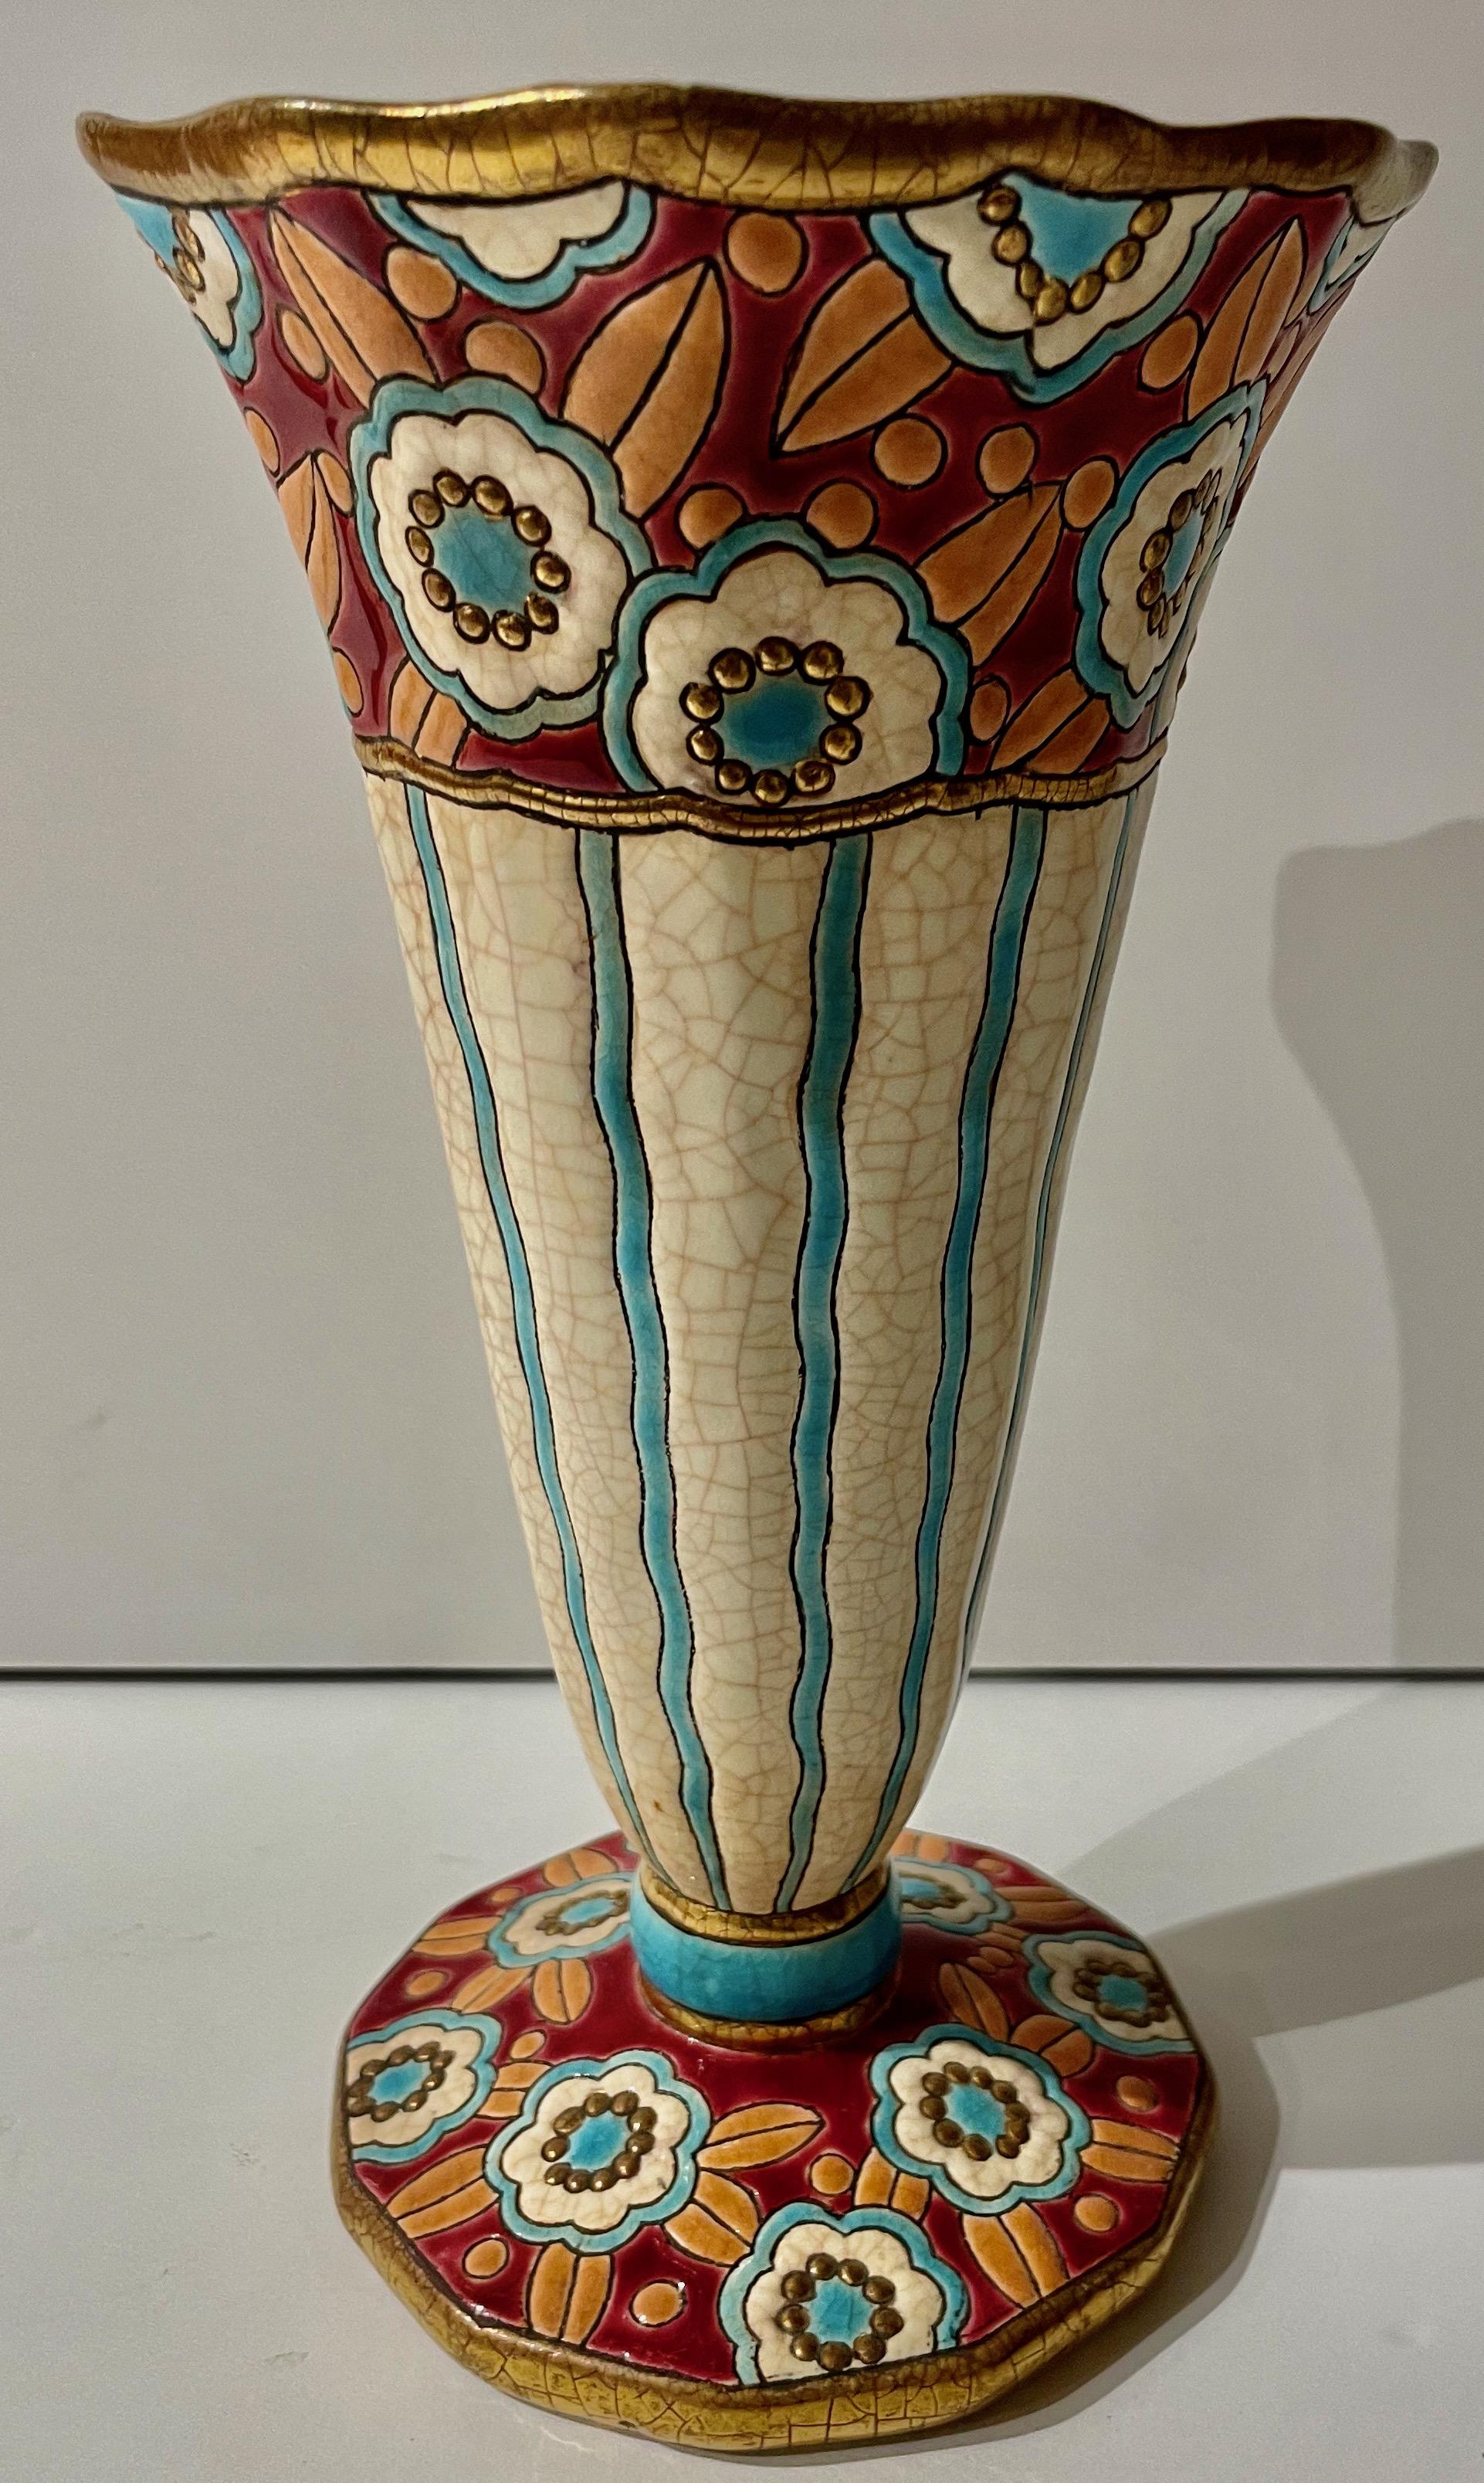 Longwy Art Deco French Cloisonné ceramic vase. Stunning colors with faceted base with blue, burgundy, and orange flowers intersected throughout the design of the vase. Gold detailing around the base and the top help to frame and accentuate this